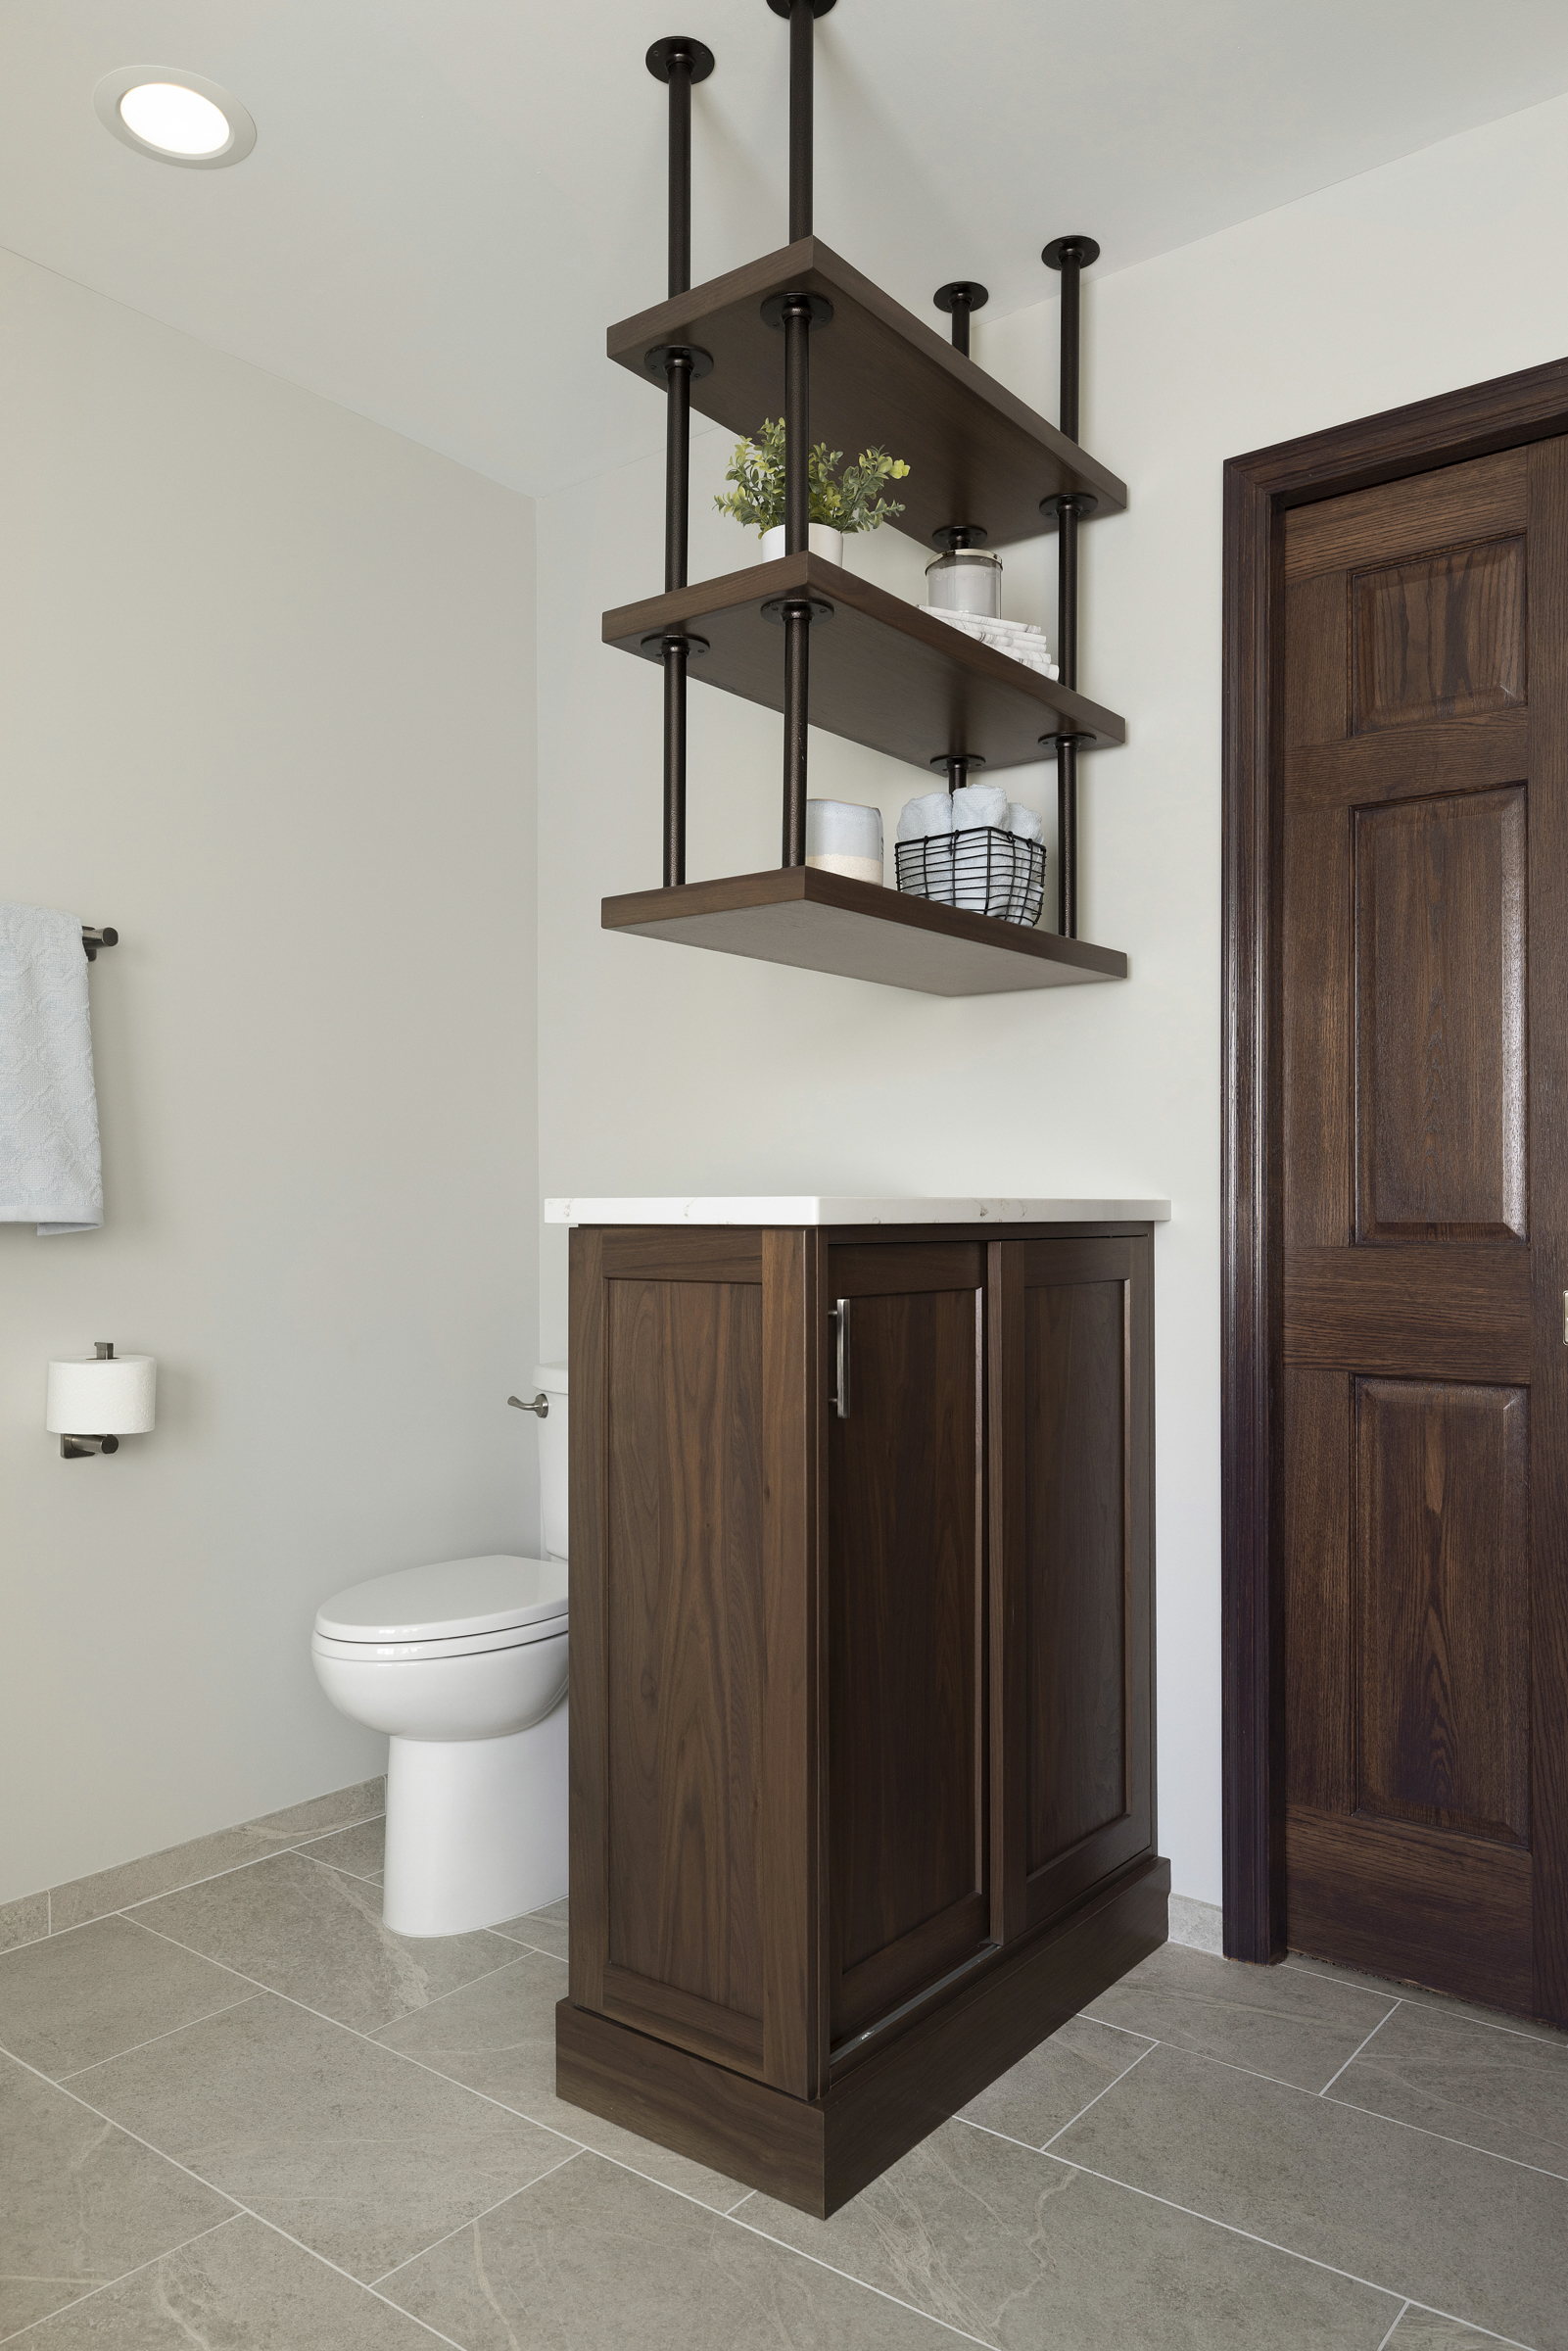 Primary bathroom renovation with dark wood cabinet and trim with shelves handing by metal bars from ceiling separating toilet area